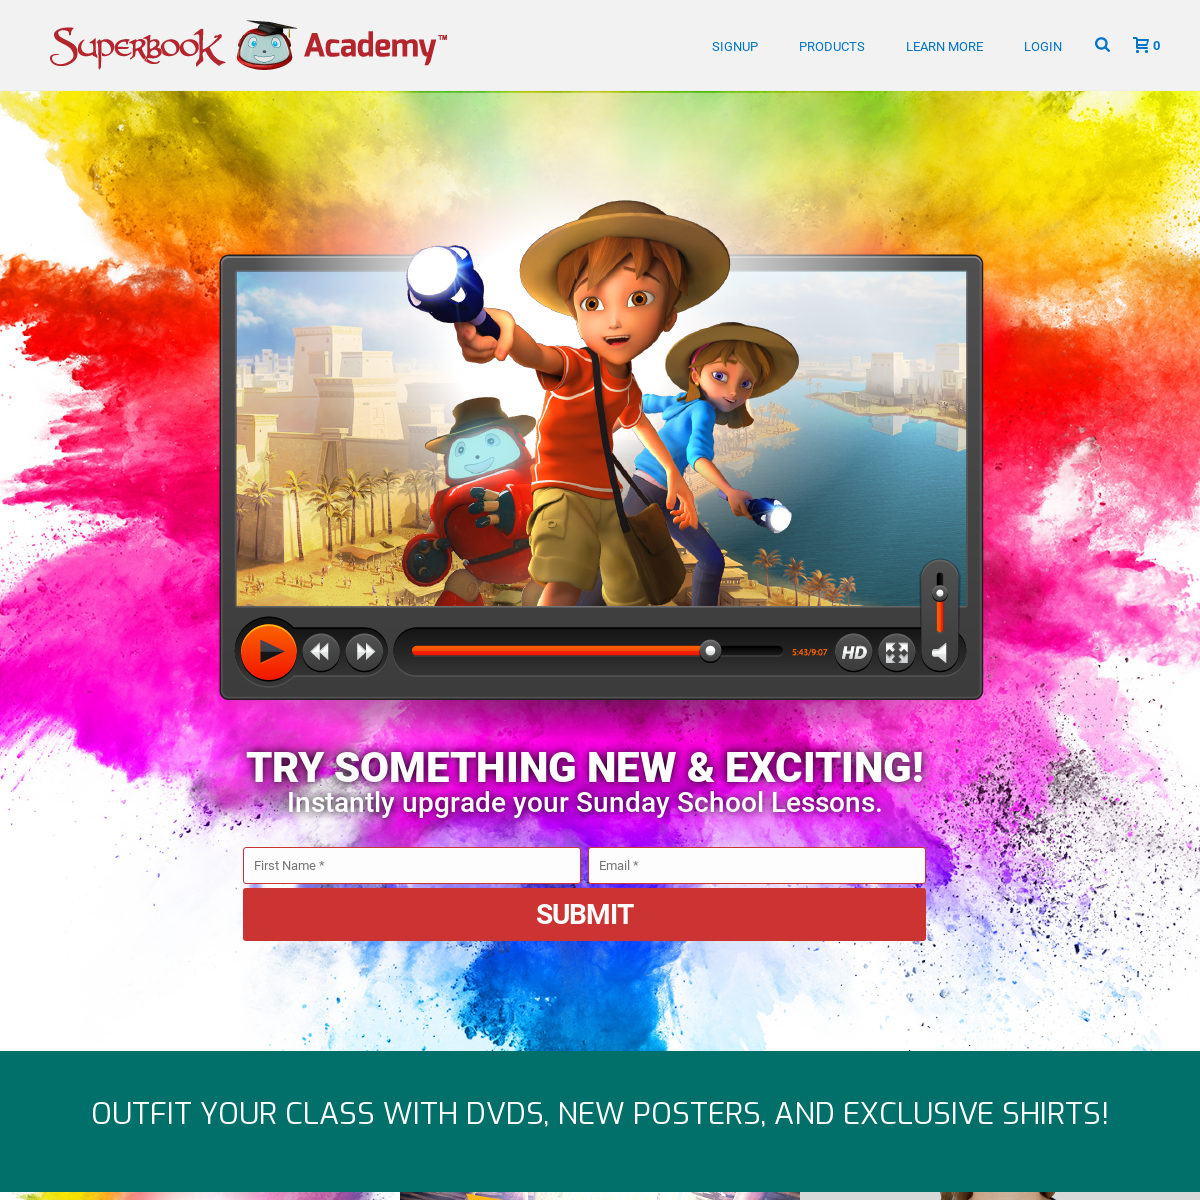 Superbook Academy – Sunday School Lessons and Bible Crafts